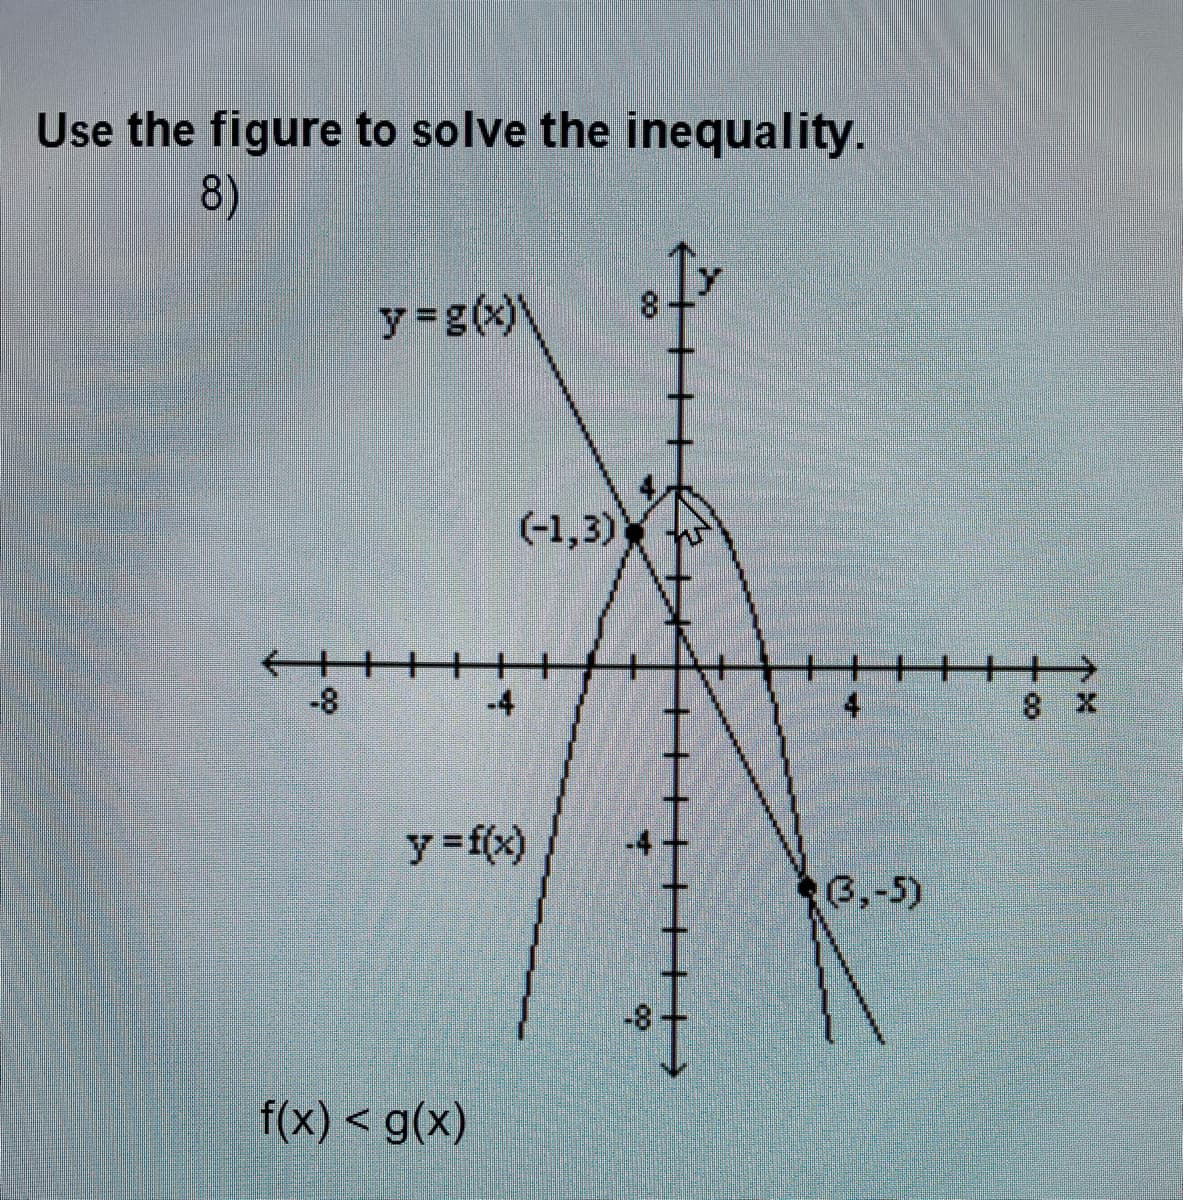 Use the figure to solve the inequality.
8)
y=g(x)\
(-1,3)
-8
-4
8.
y f(x)
6,-5)
f(x) < g(x)
